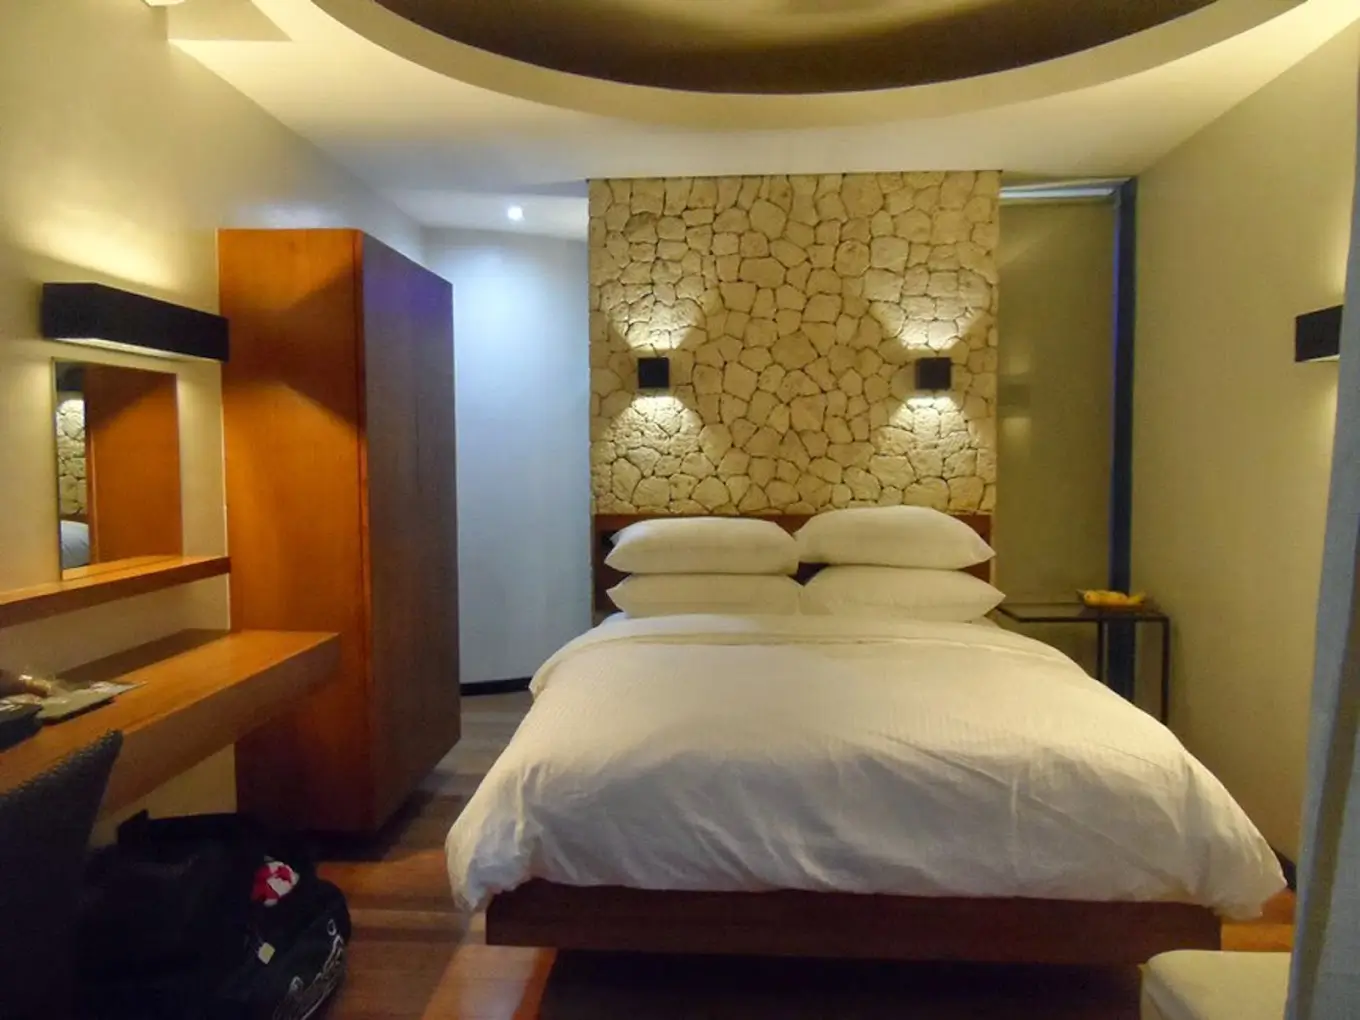 Elegant guest room at WaterColors Boracay Dive Resort, a boutique hotel in Boracay, featuring a king-sized bed with a unique stone accent wall and modern furnishings.